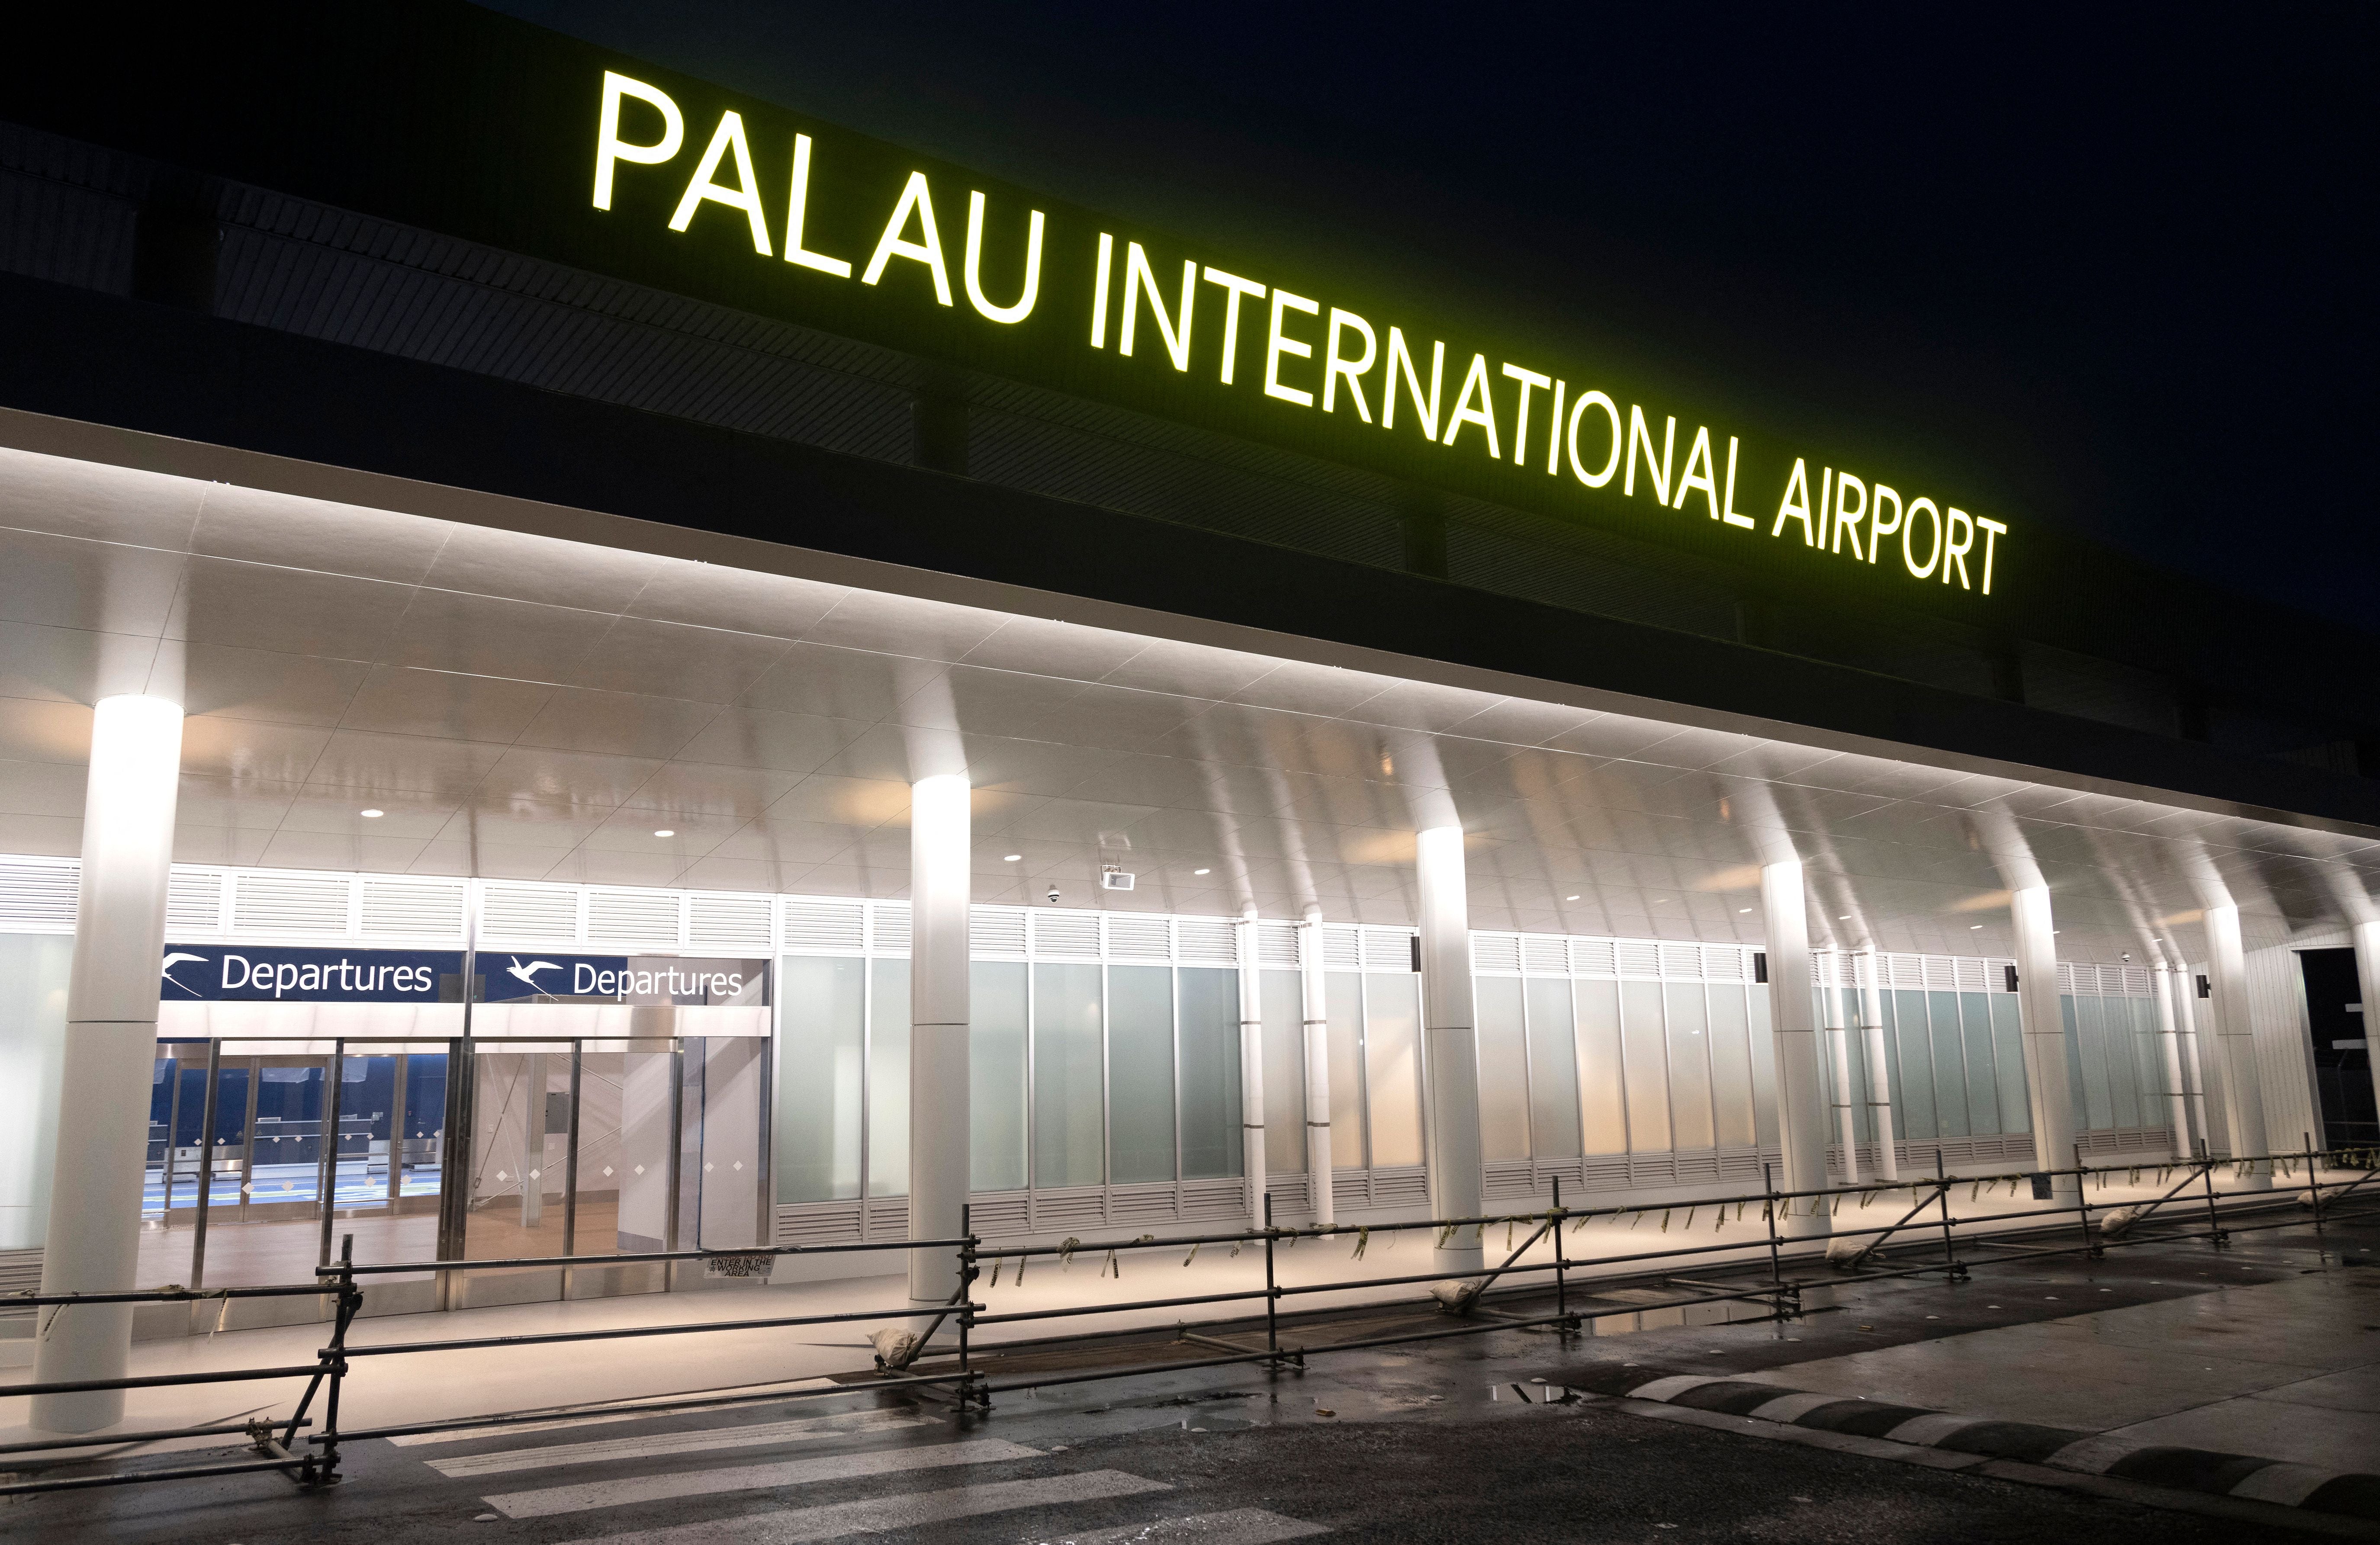 One of last remaining Covid-free countries, Palau, has just had its first Covid-19 case but authorities say there is no risk of infection.